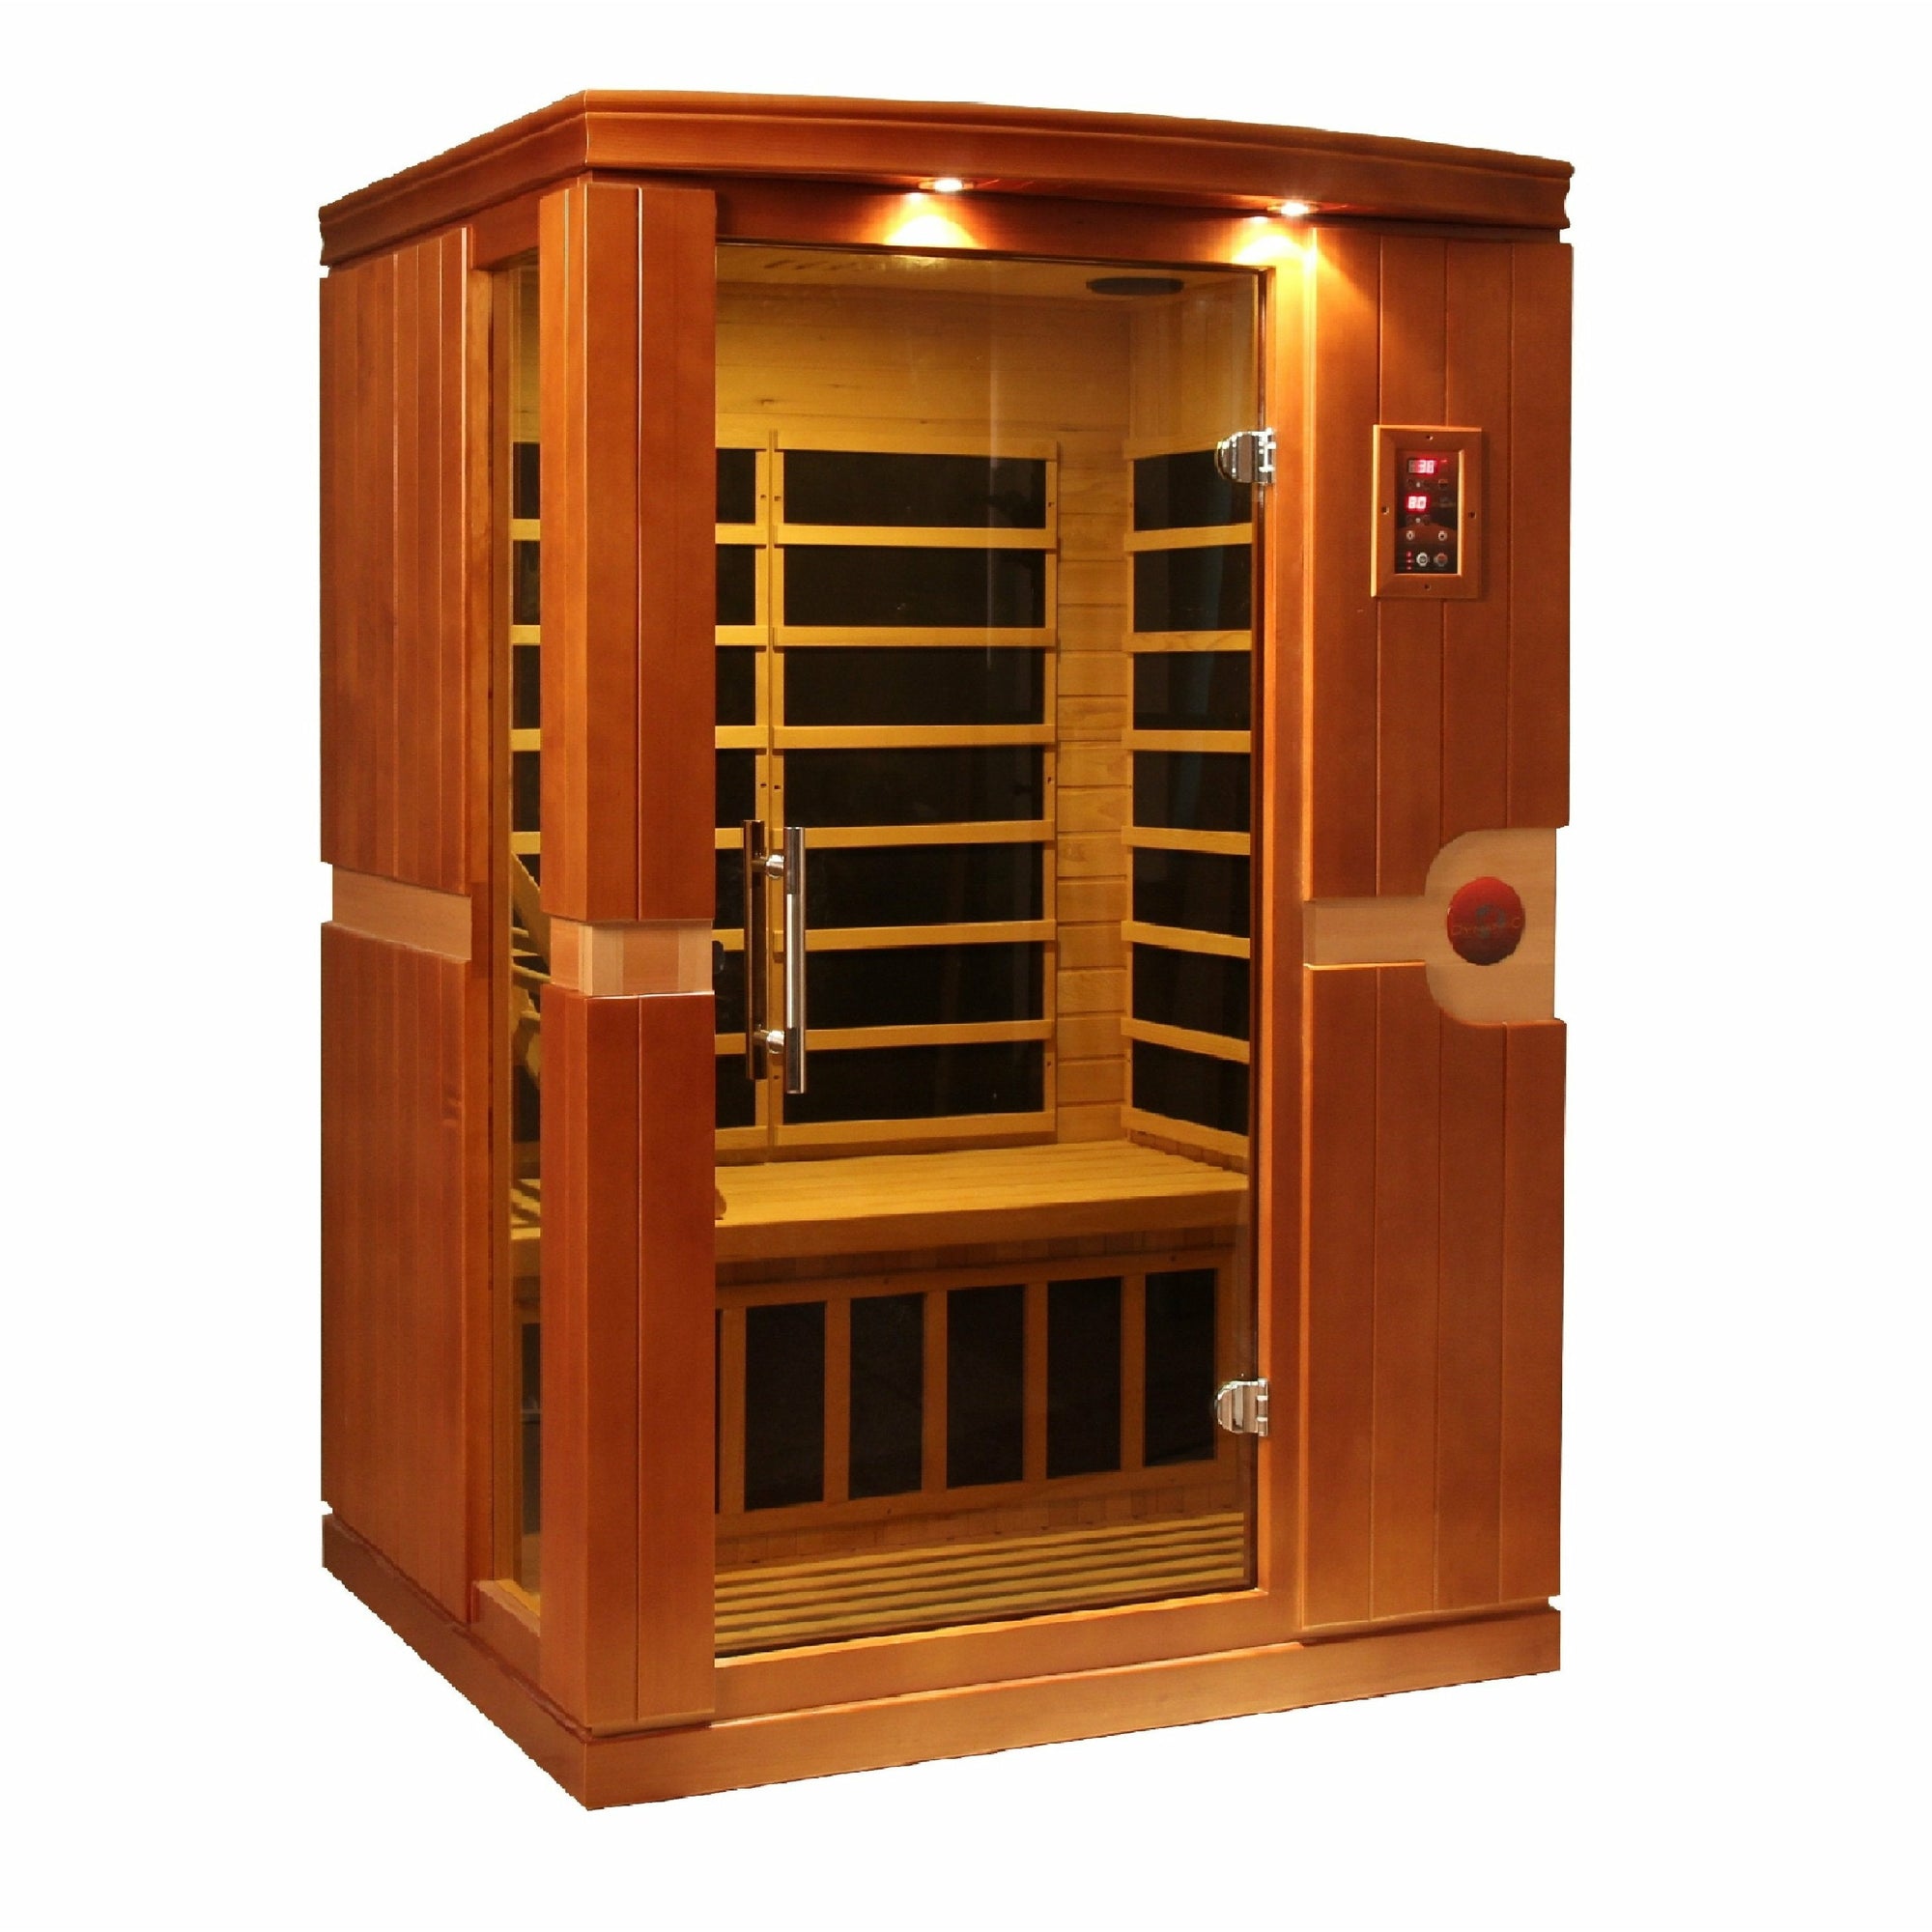 Dynamic Venice Edition Low EMF Far Infrared Sauna - 2 Person Natural hemlock wood construction Roof vent with Tempered glass door, Interior reading/chromotherapy lighting system and Interior and exterior LED control panel side view in white background